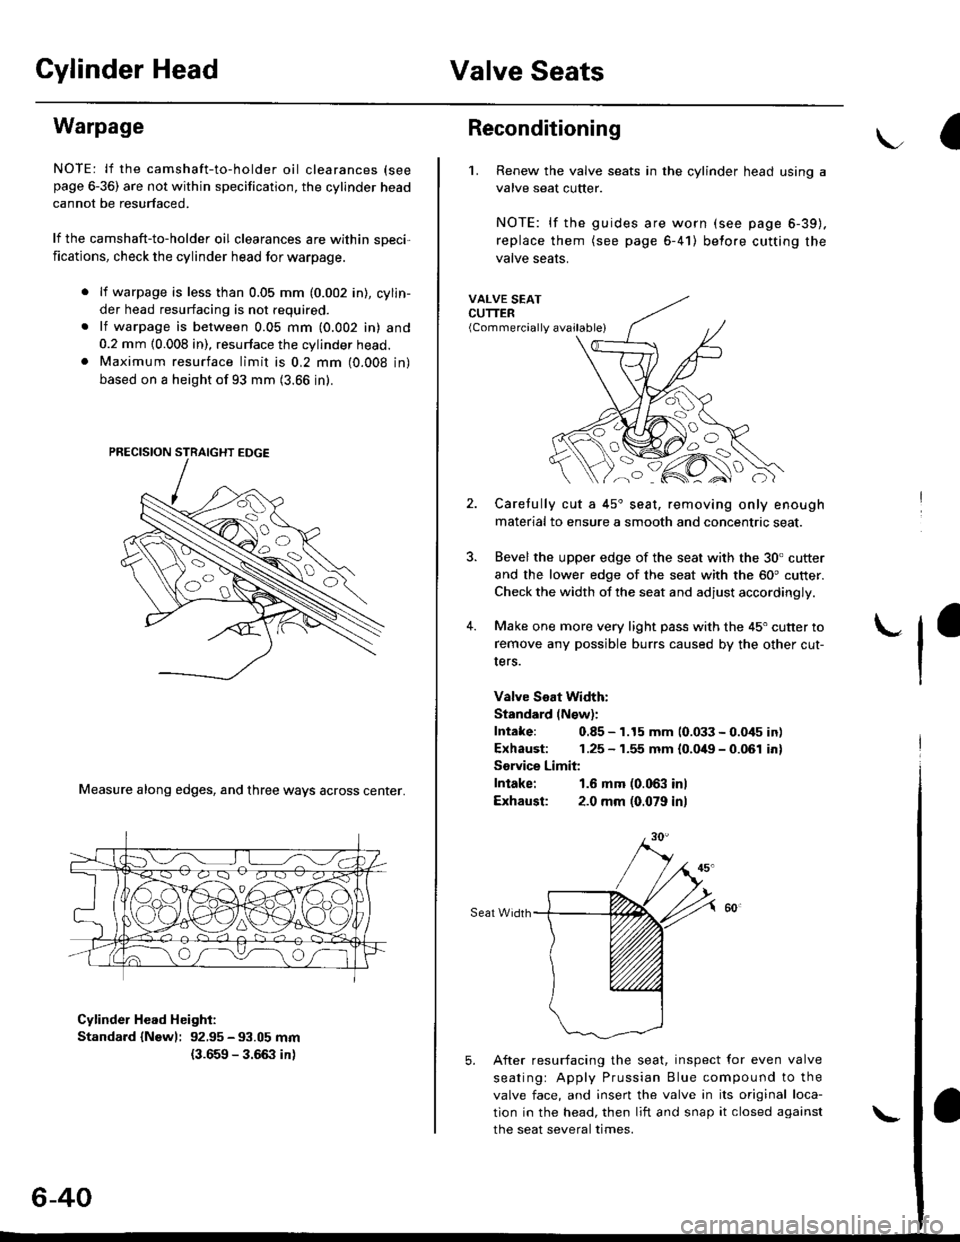 HONDA CIVIC 2000 6.G Workshop Manual Cylinder HeadValve Seats
Warpage
NOTE: lf the camshaft-to-holder oil clearances (see
page 6-36) are not within specification, the cylinder head
cannot be resurfaced.
lf the camshaft-to-holder oil clea